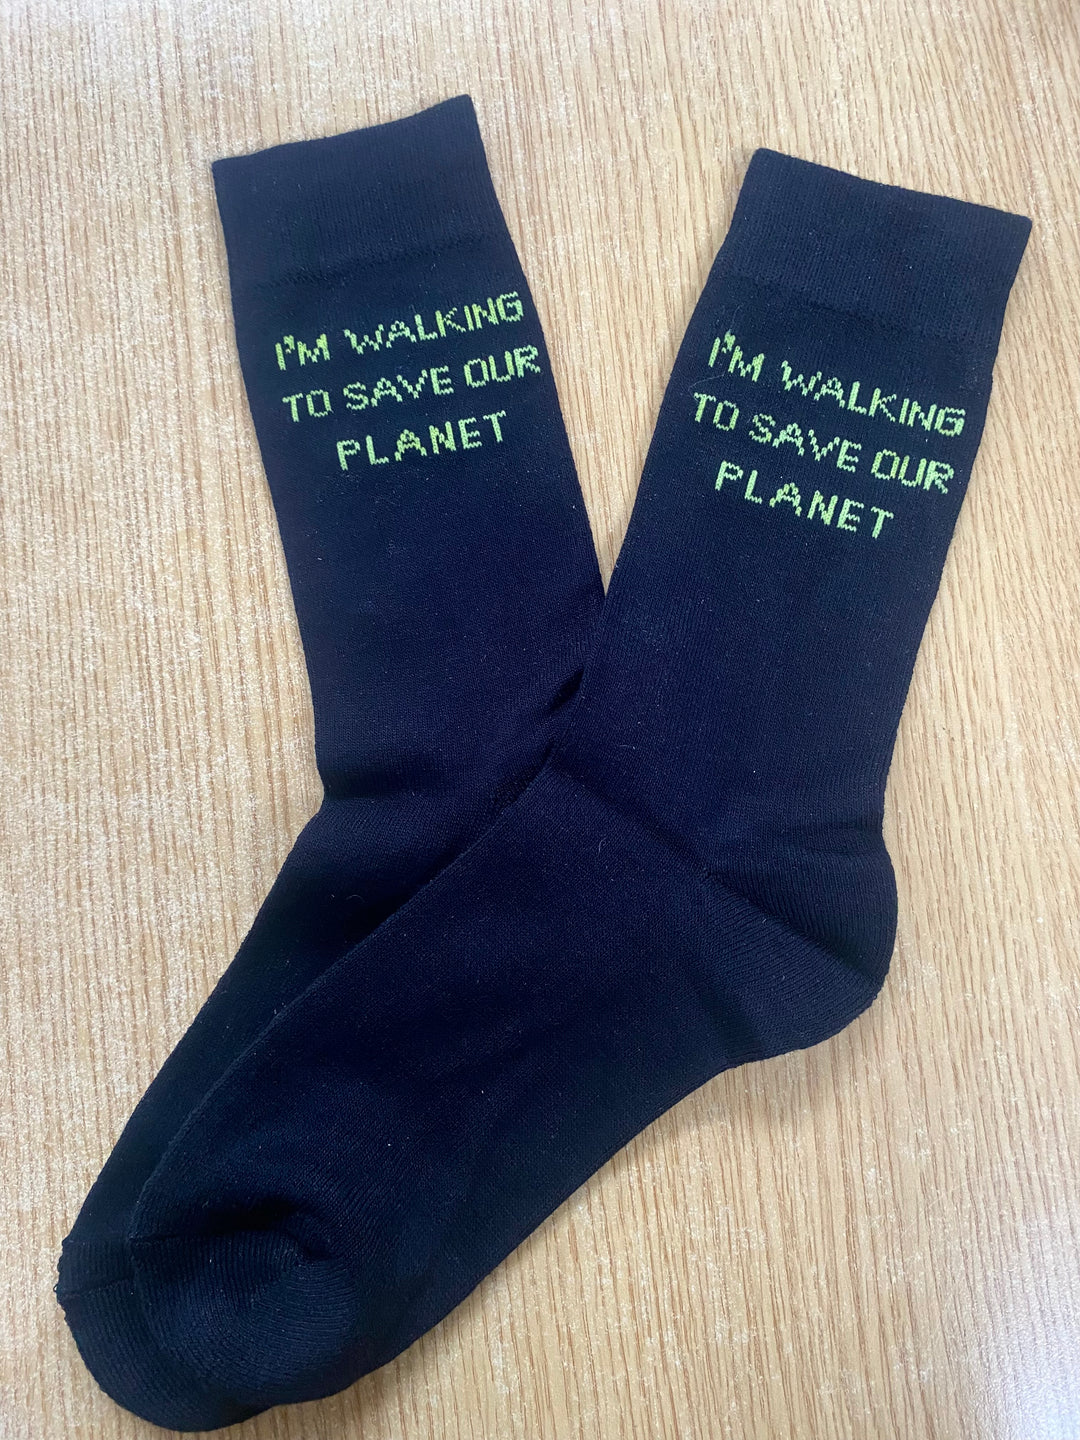 Men's "I'm Walking To Save Our Planet" Socks